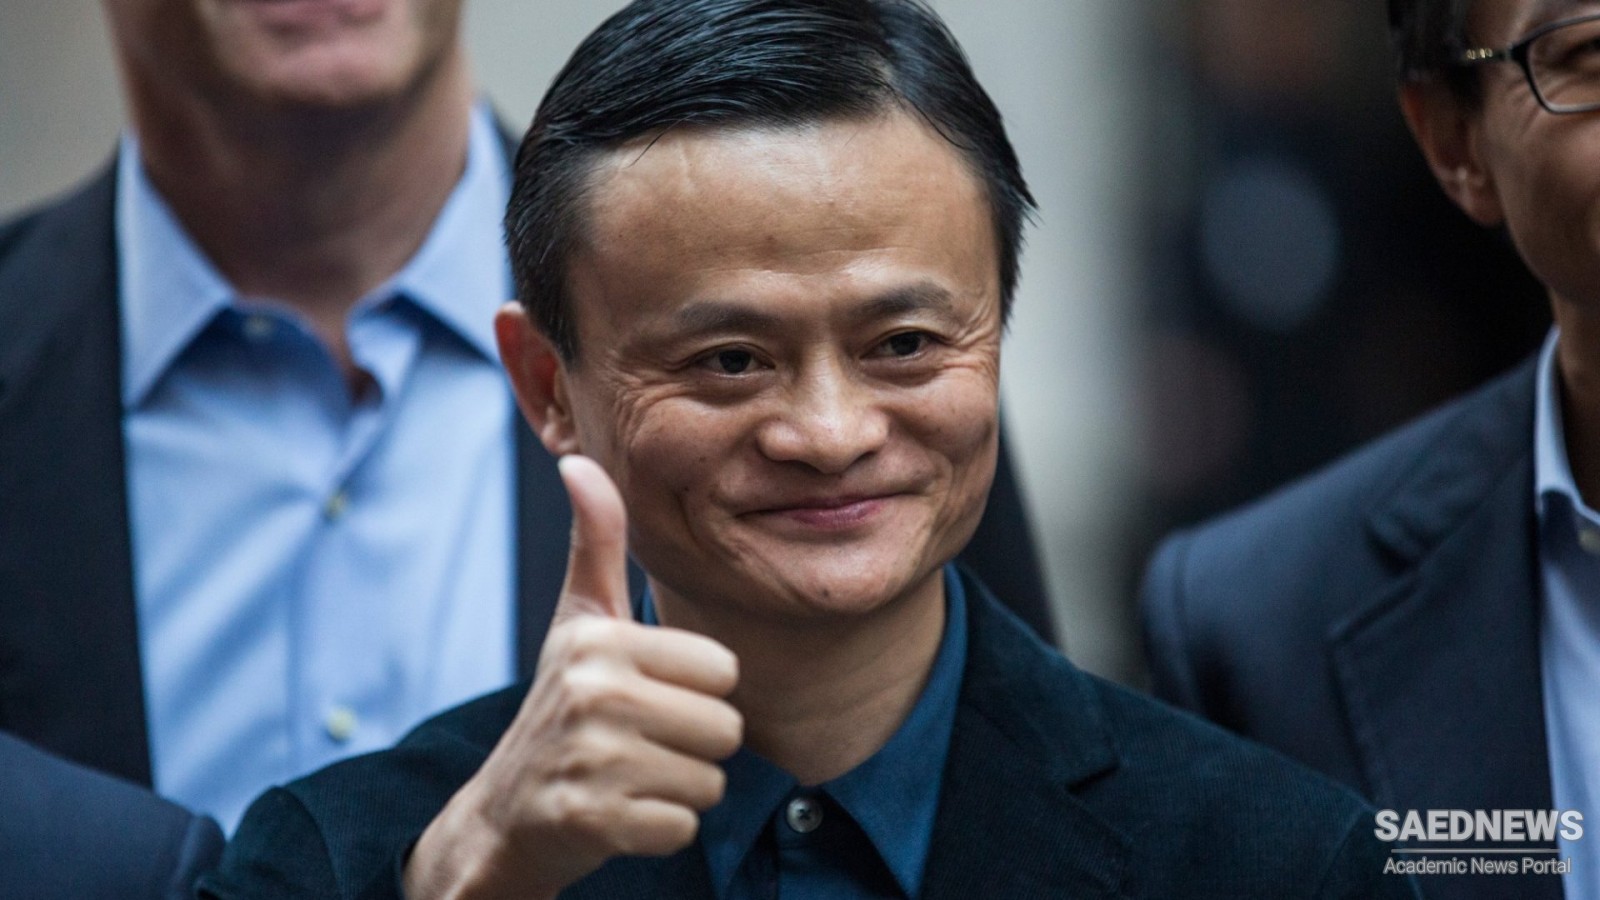 Jack Ma Founder of Alibaba Group and Alipay Speaks His Mind